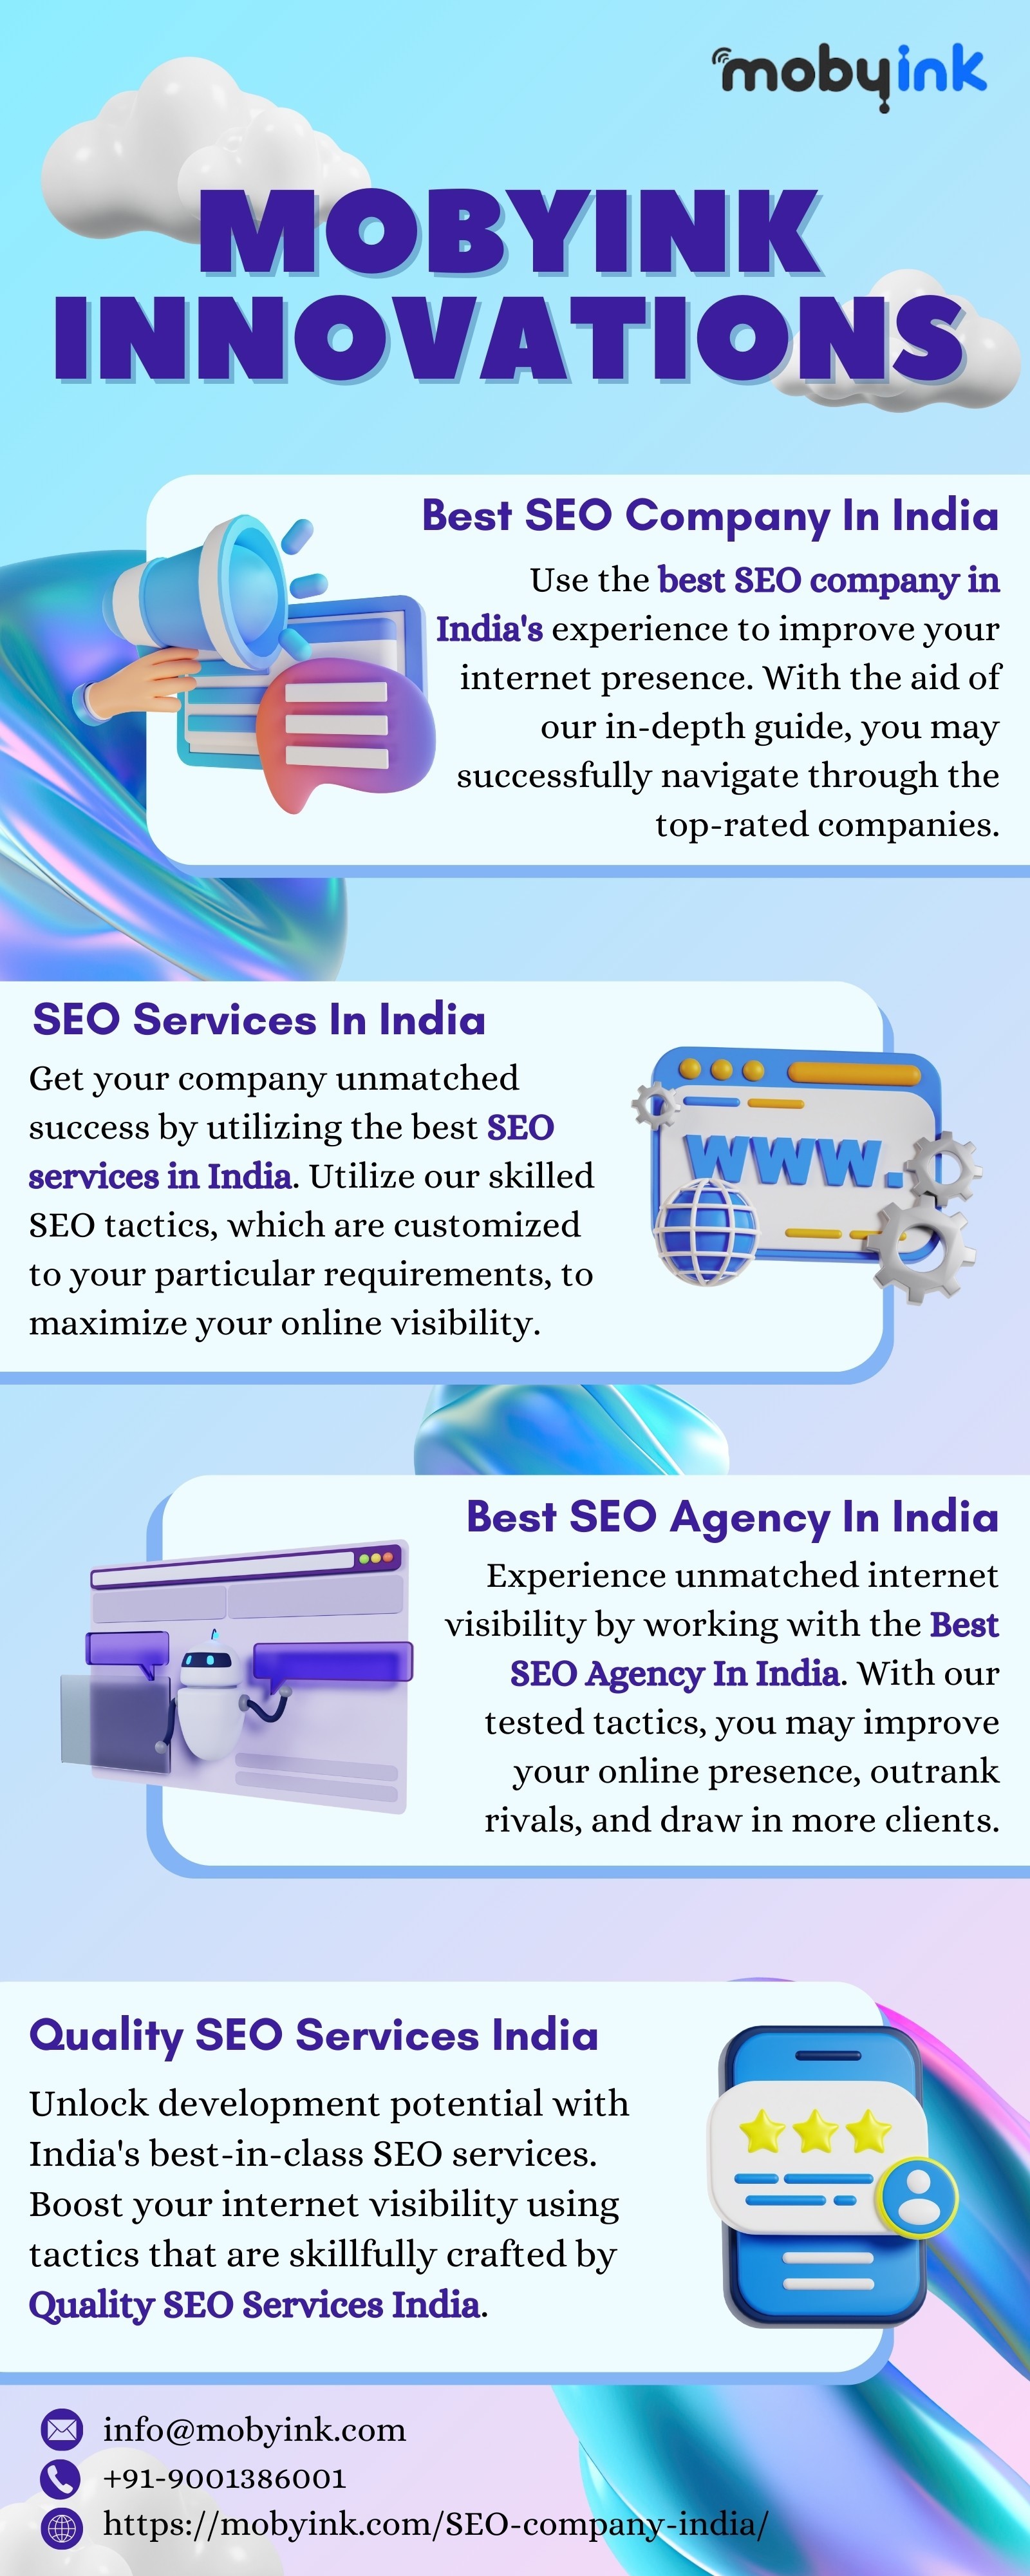 Unlock Growth Potential with Premier Quality SEO Services India